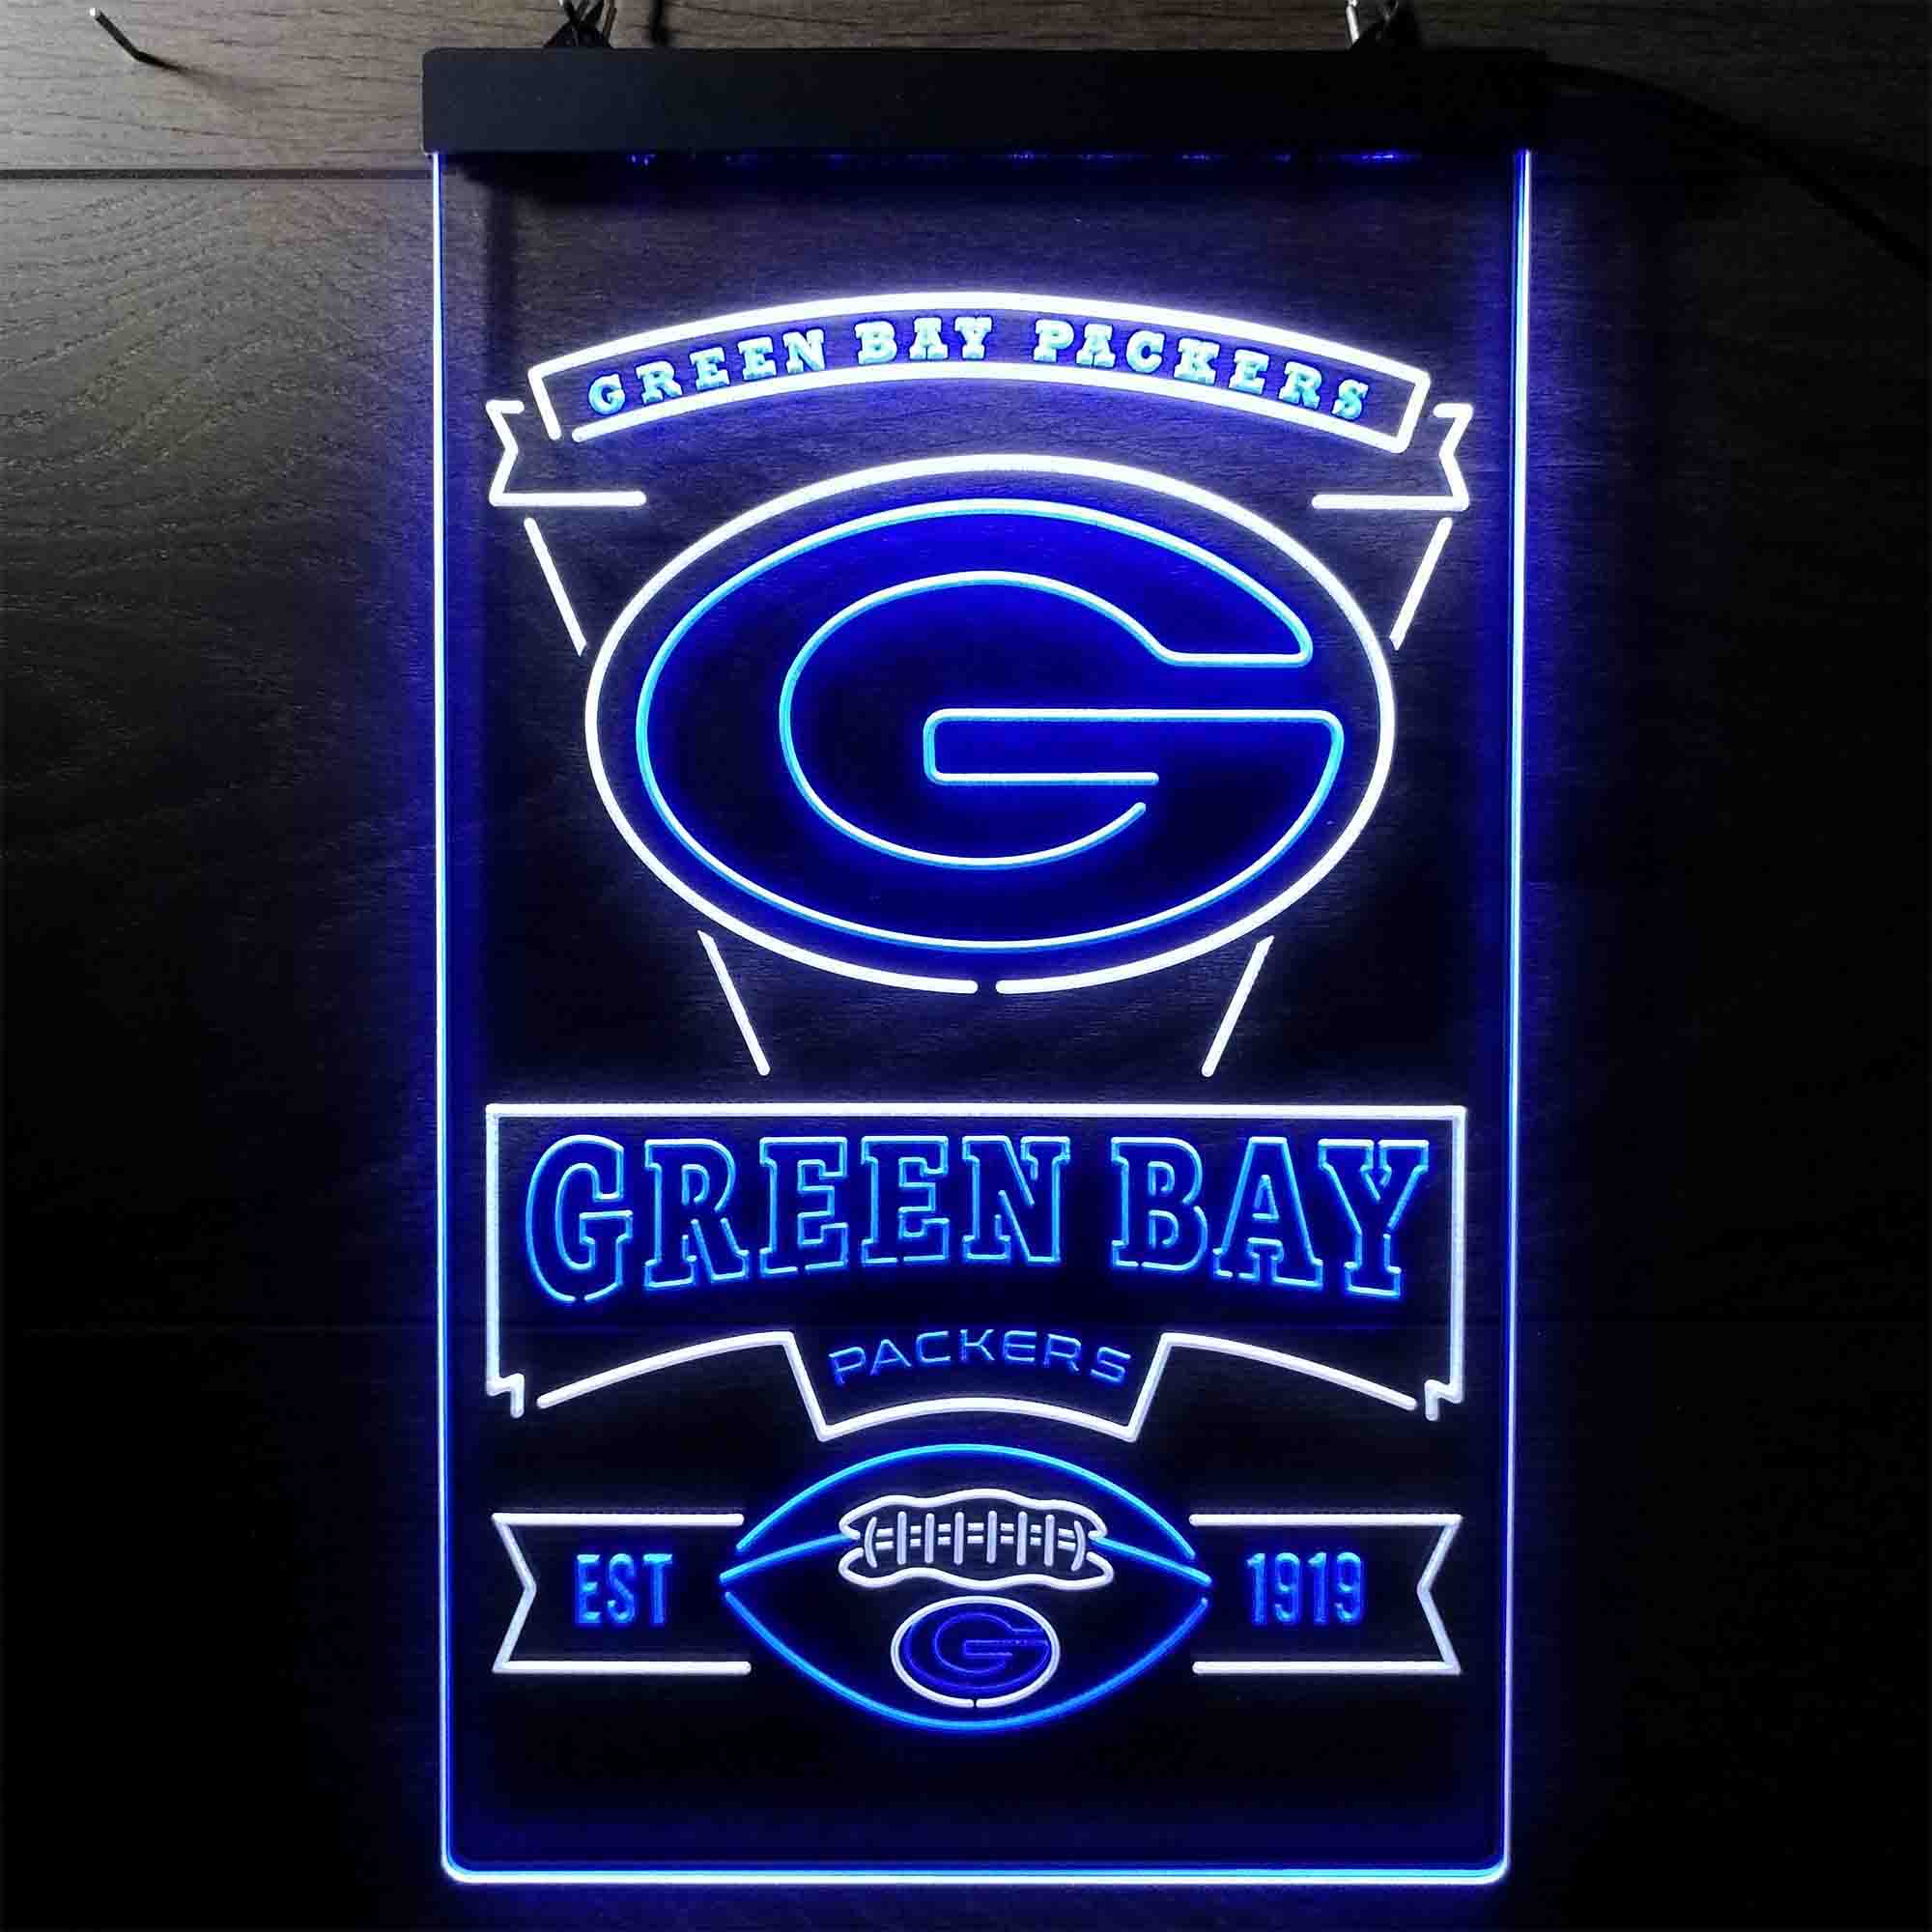 Green Bay Packers Memorabilia Neon LED Sign - Limited Edition